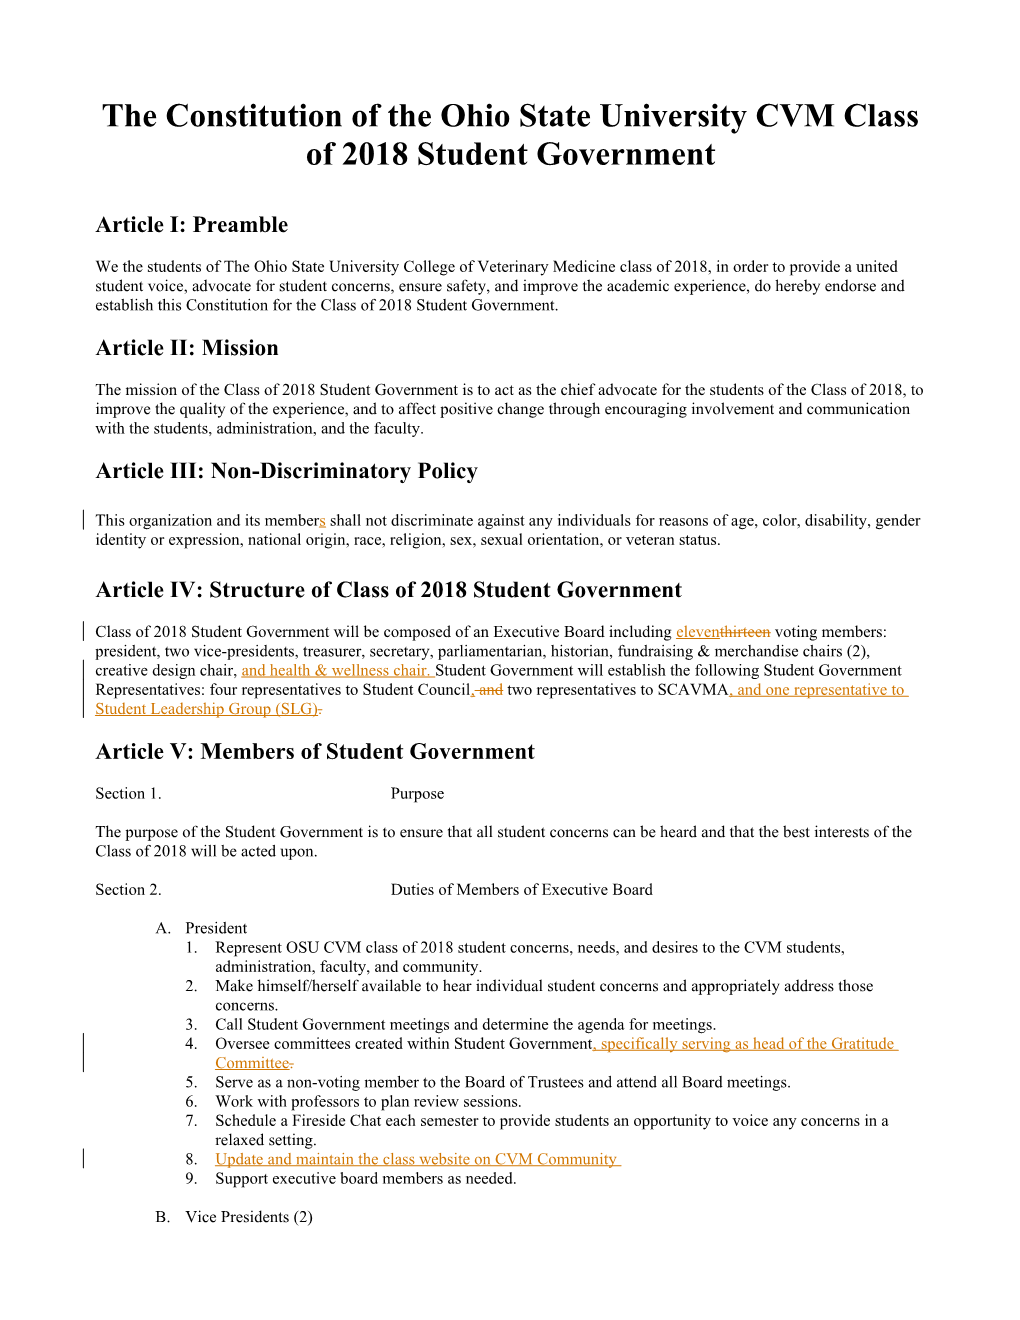 The Constitution of the Ohio State University CVM Class of 2018 Student Government